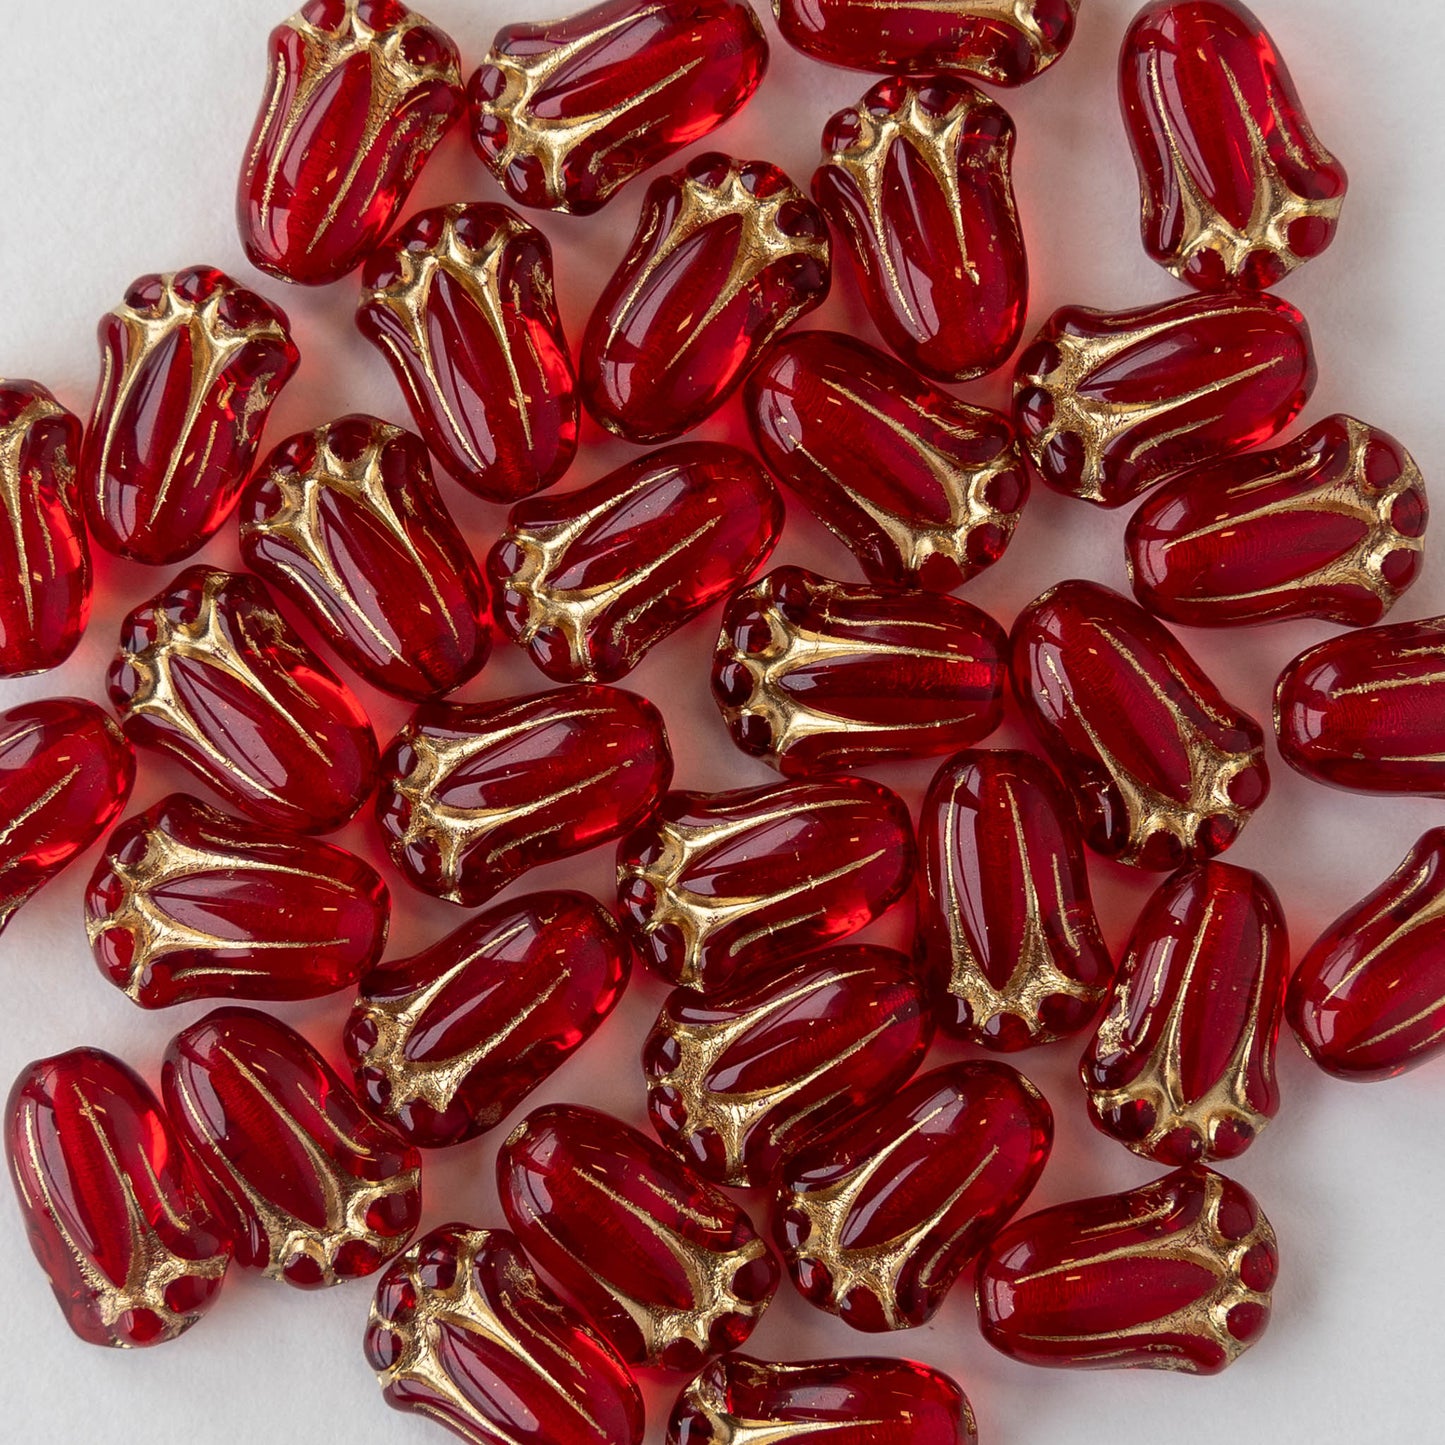 Tulip Flower Beads - Red with Gold Wash - 20 beads